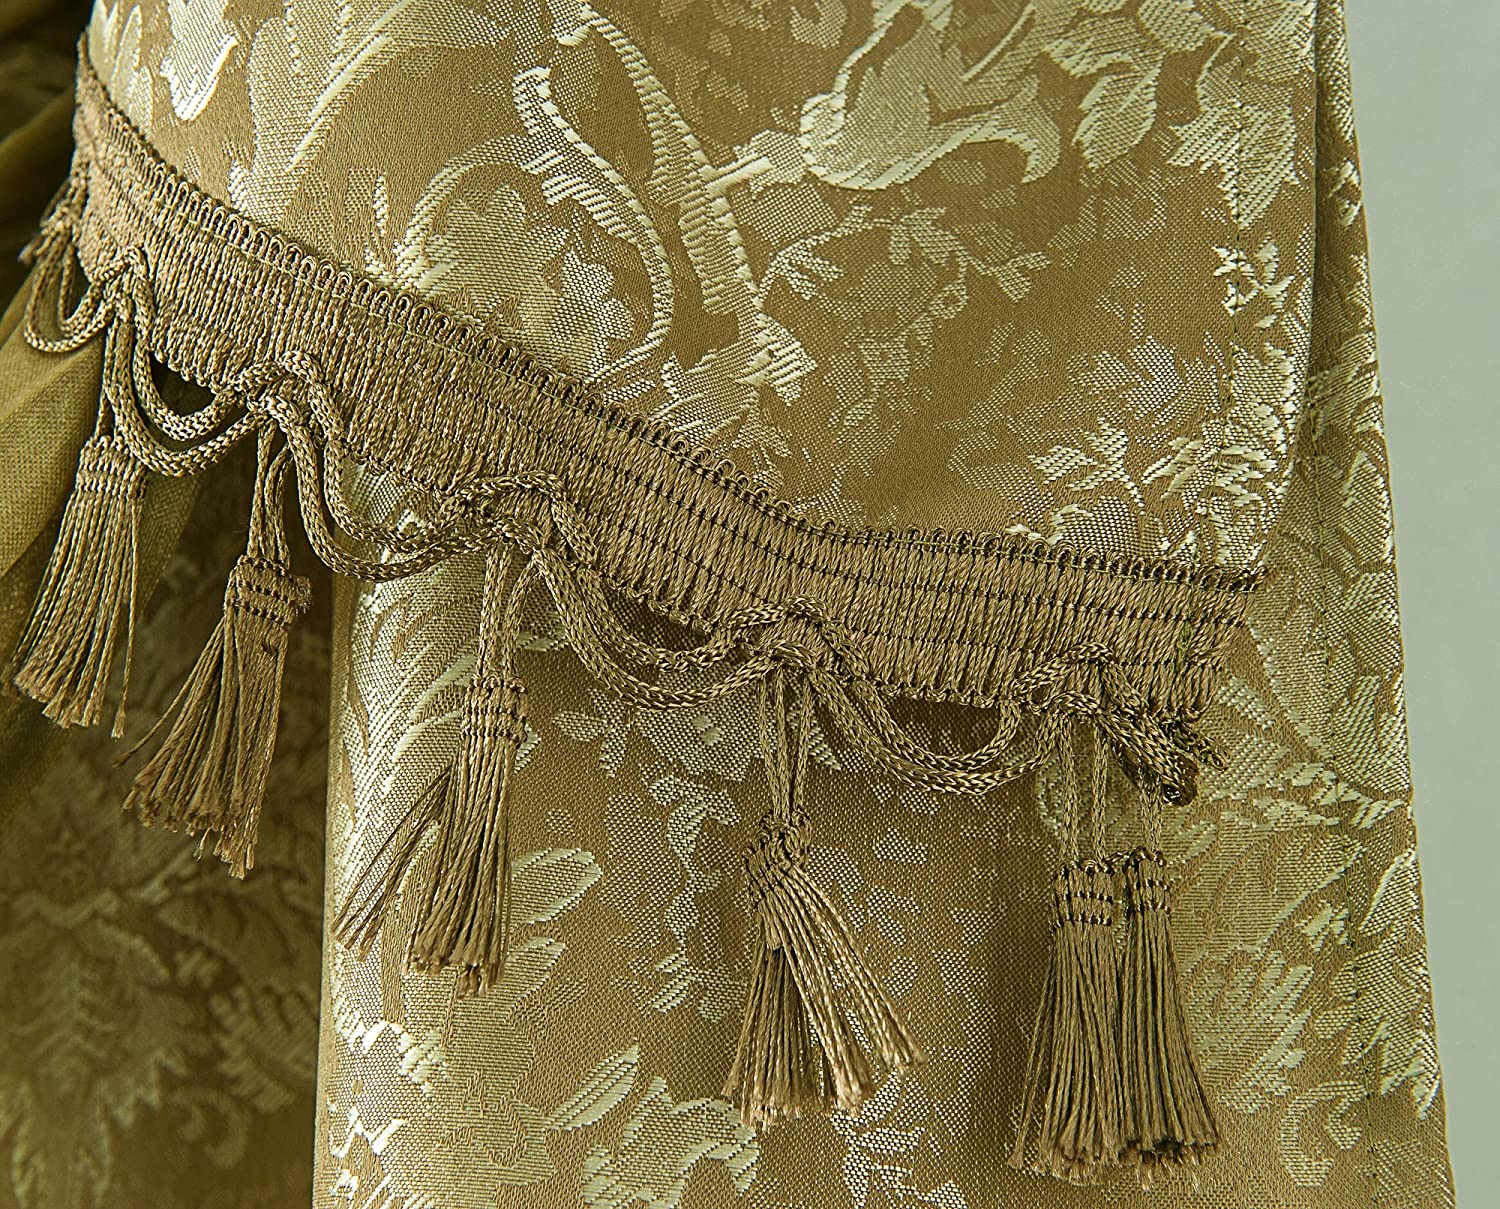 Gloria Floral/Damask Textured Jacquard 54 x 84 in. Single Rod Pocket Curtain Panel w/Attached 18 in. Valance - Linen Universe Co.